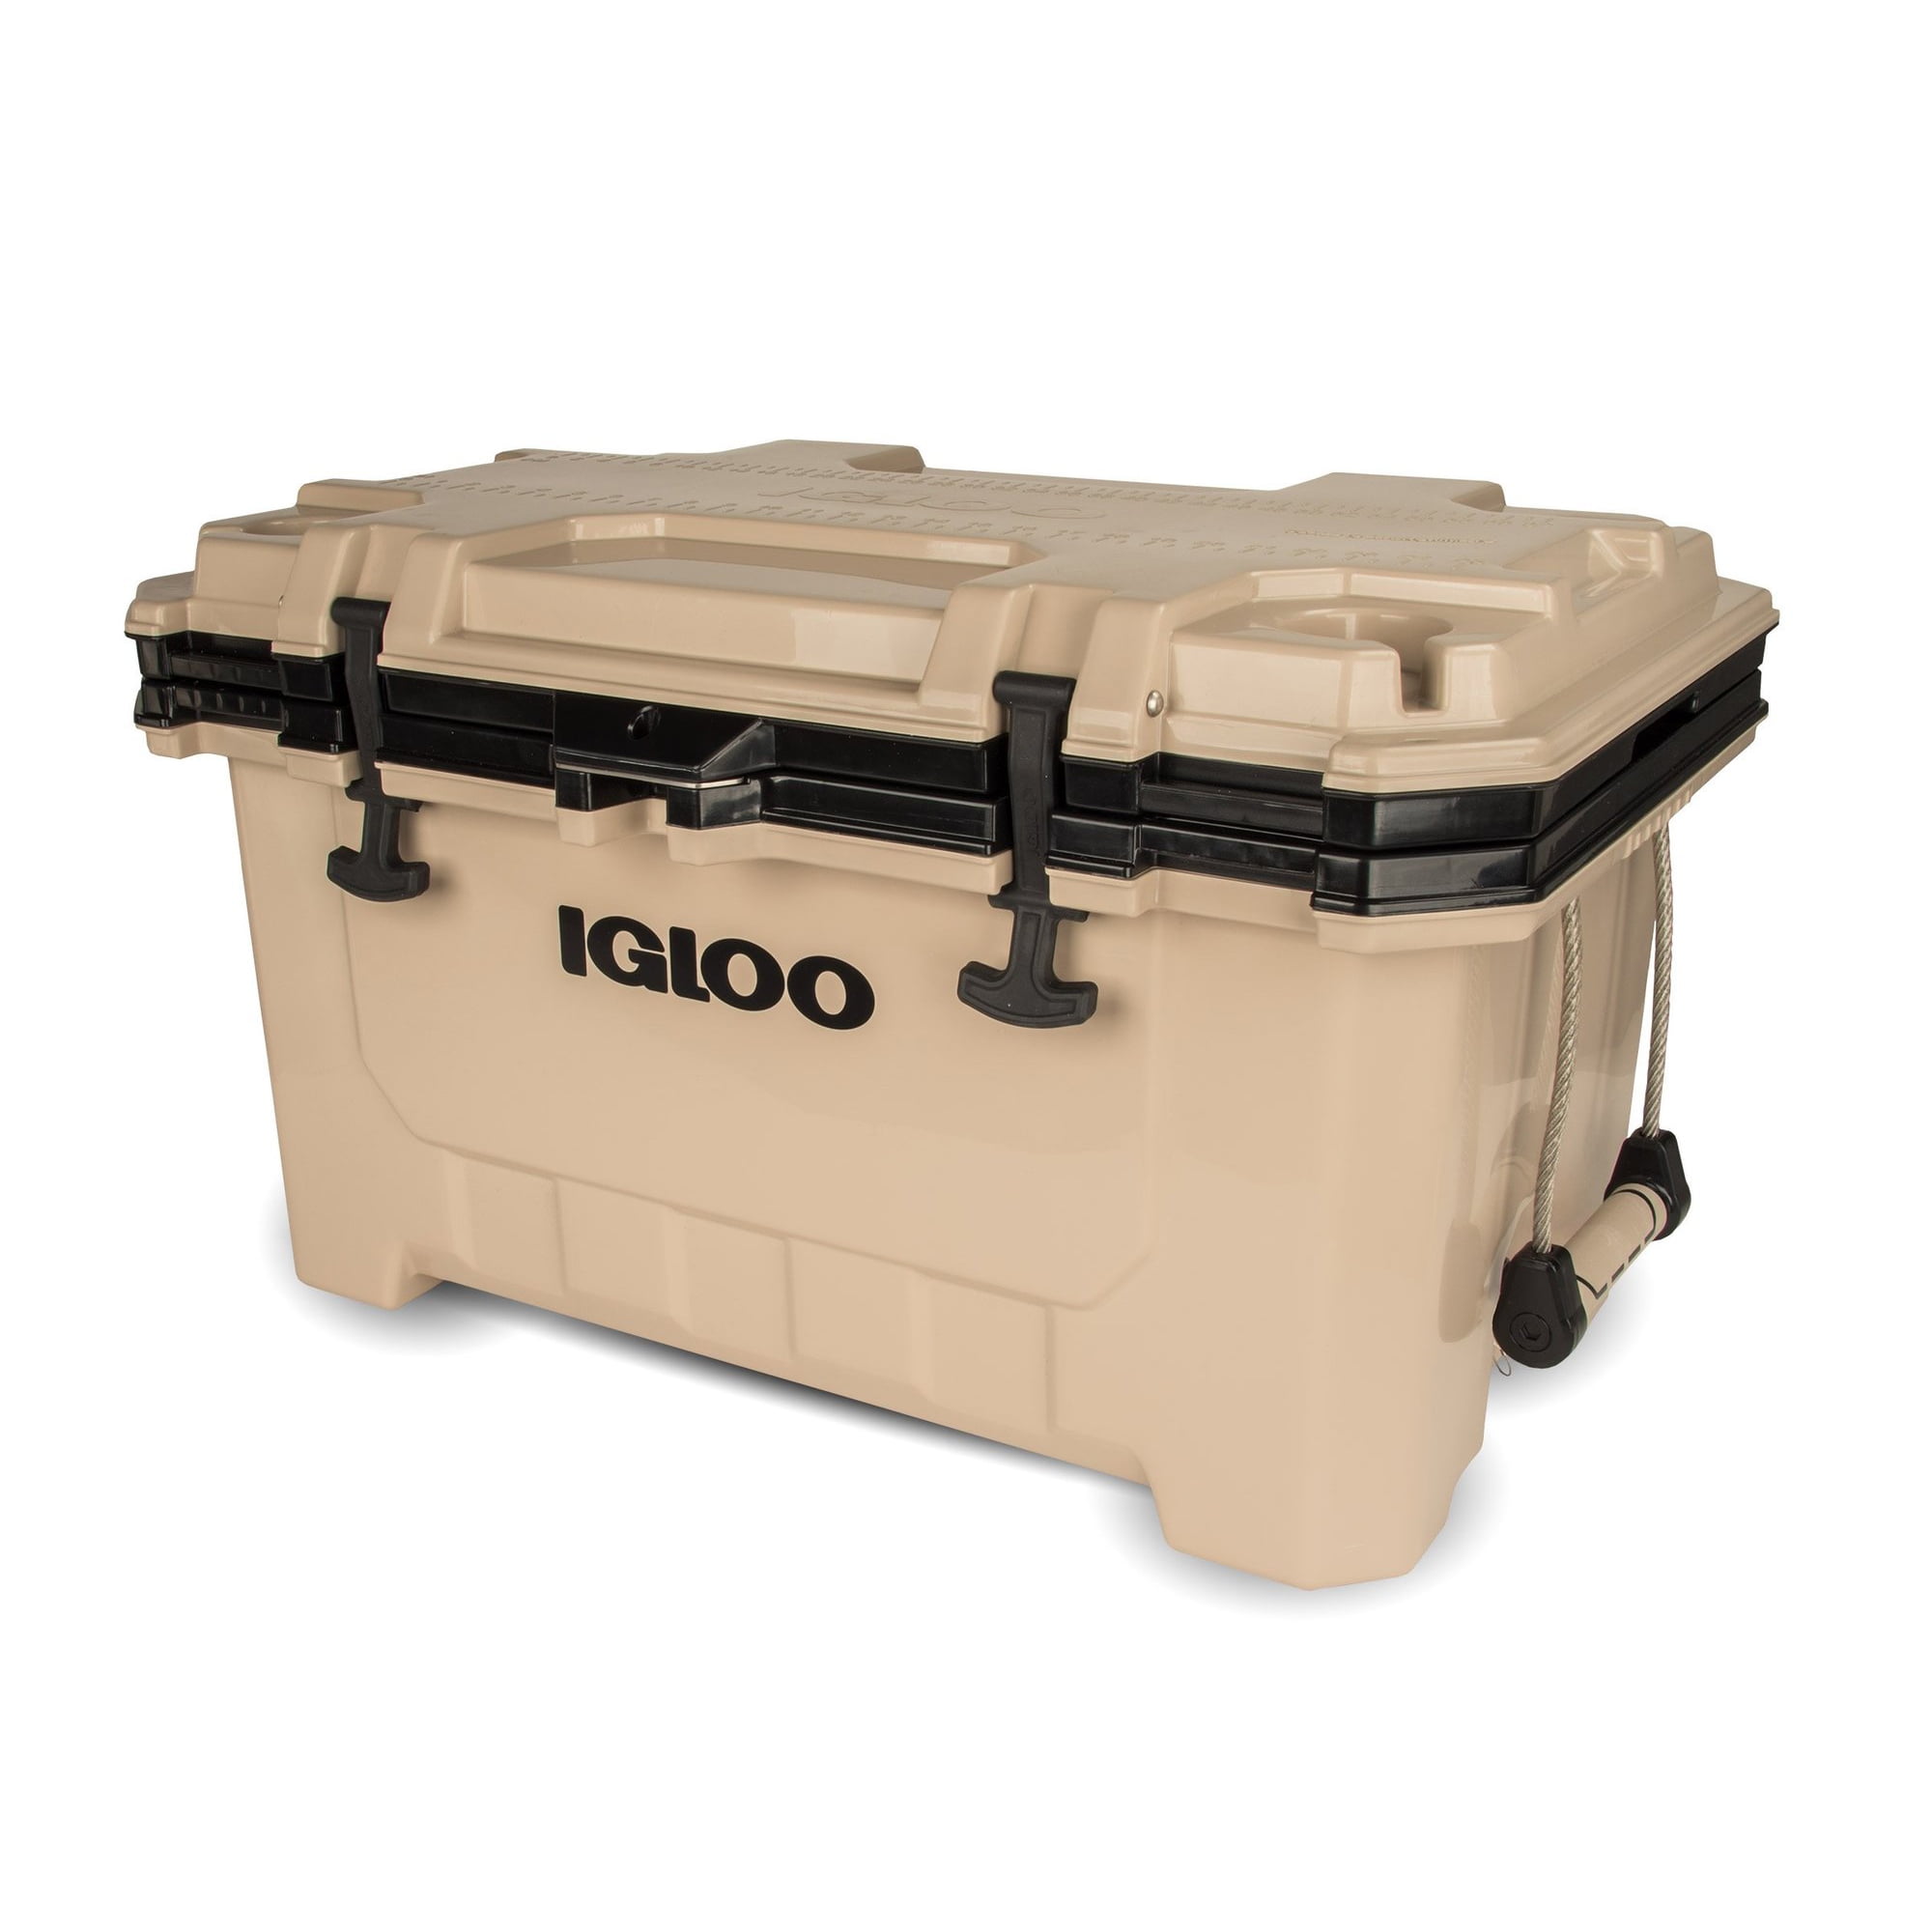 Igloo 00049858 IMX 70 Qt. Heavy Duty Injected Molded Construction Cooler,  Tan